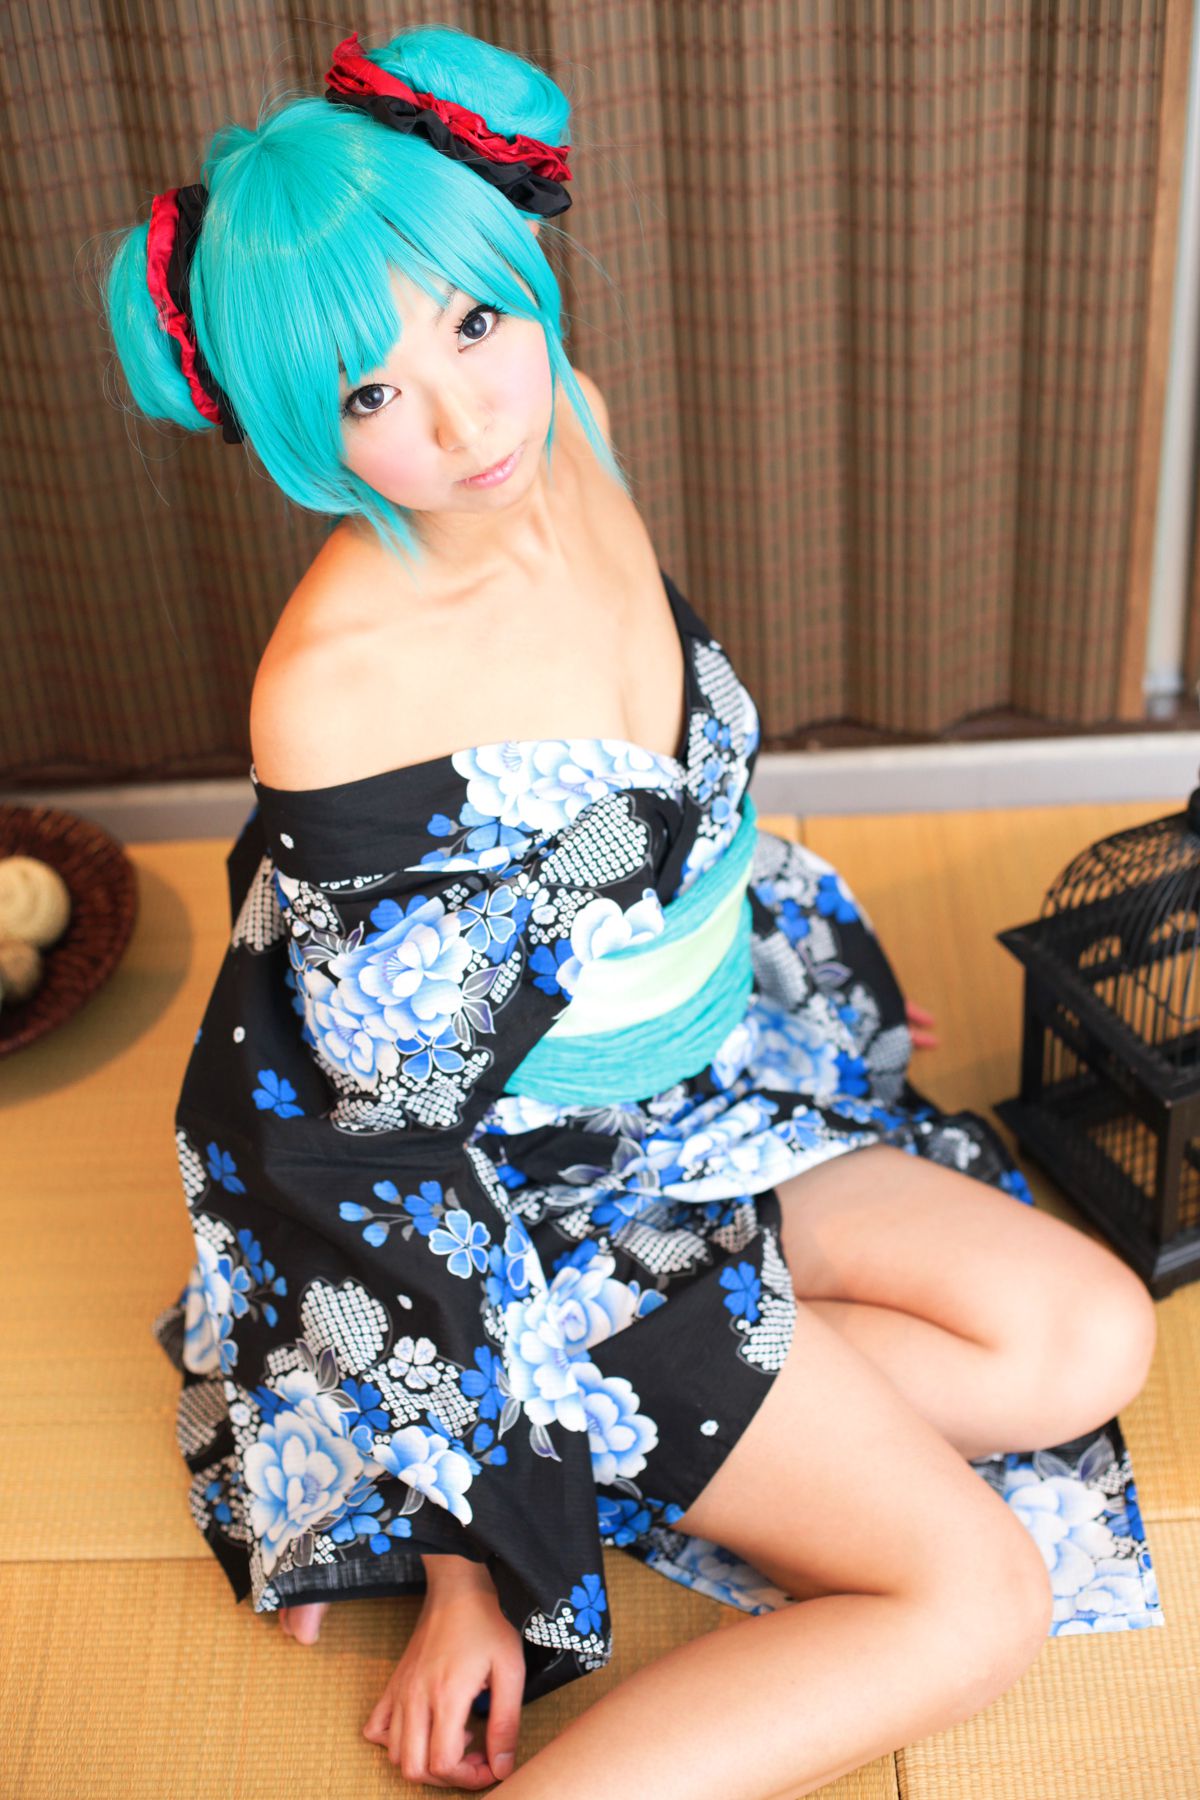 taotuhome[Cosplay] Necoco as Hatsune Miku from Vocaloid 套图第106张